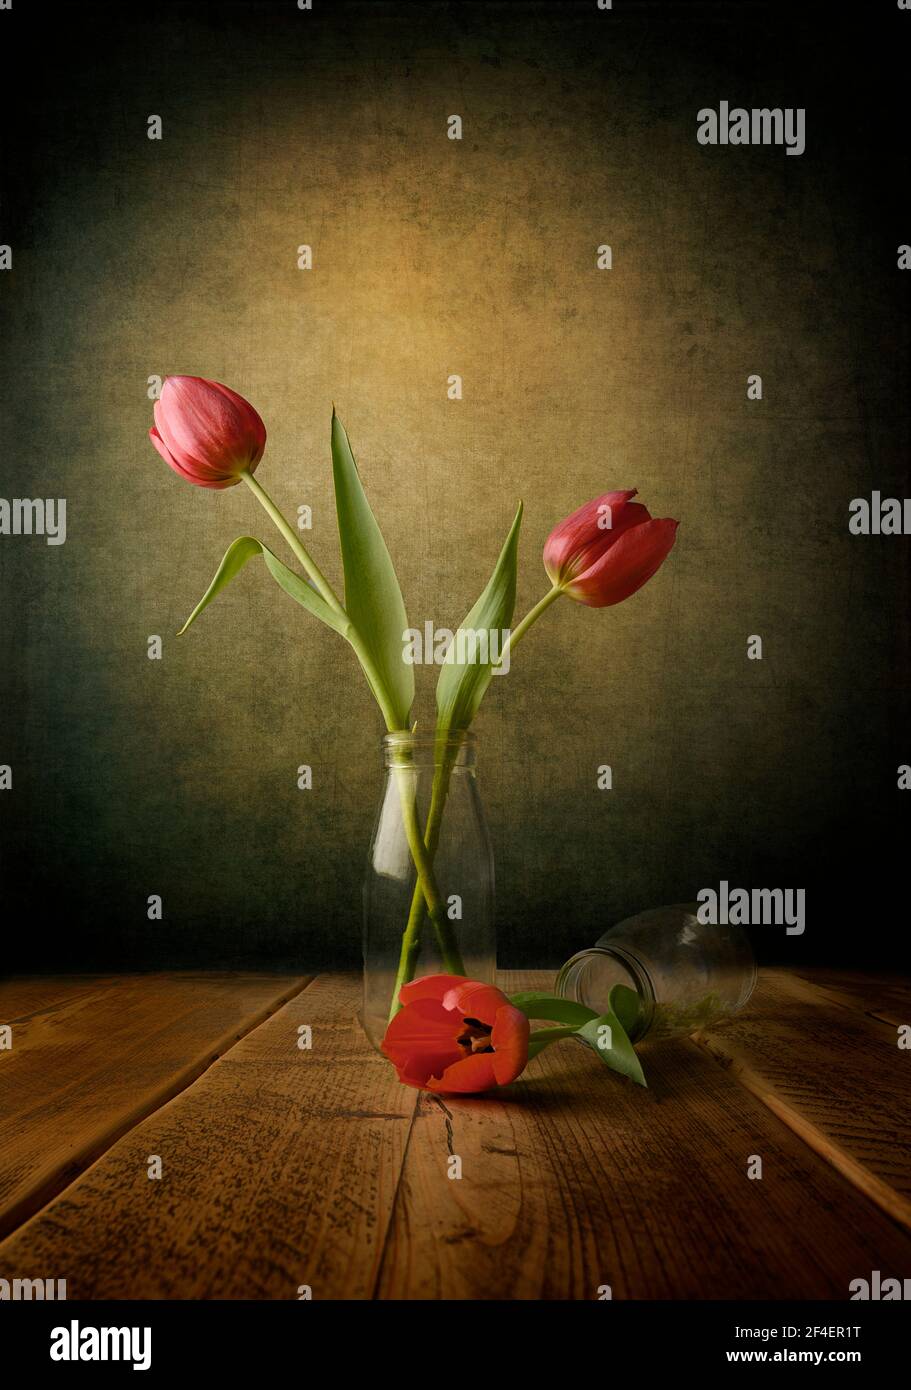 Fine Art image of three fresh cut red tulips, 2 standing in a clear glass bottle against a dark blue, green background and 1 lying flat Stock Photo